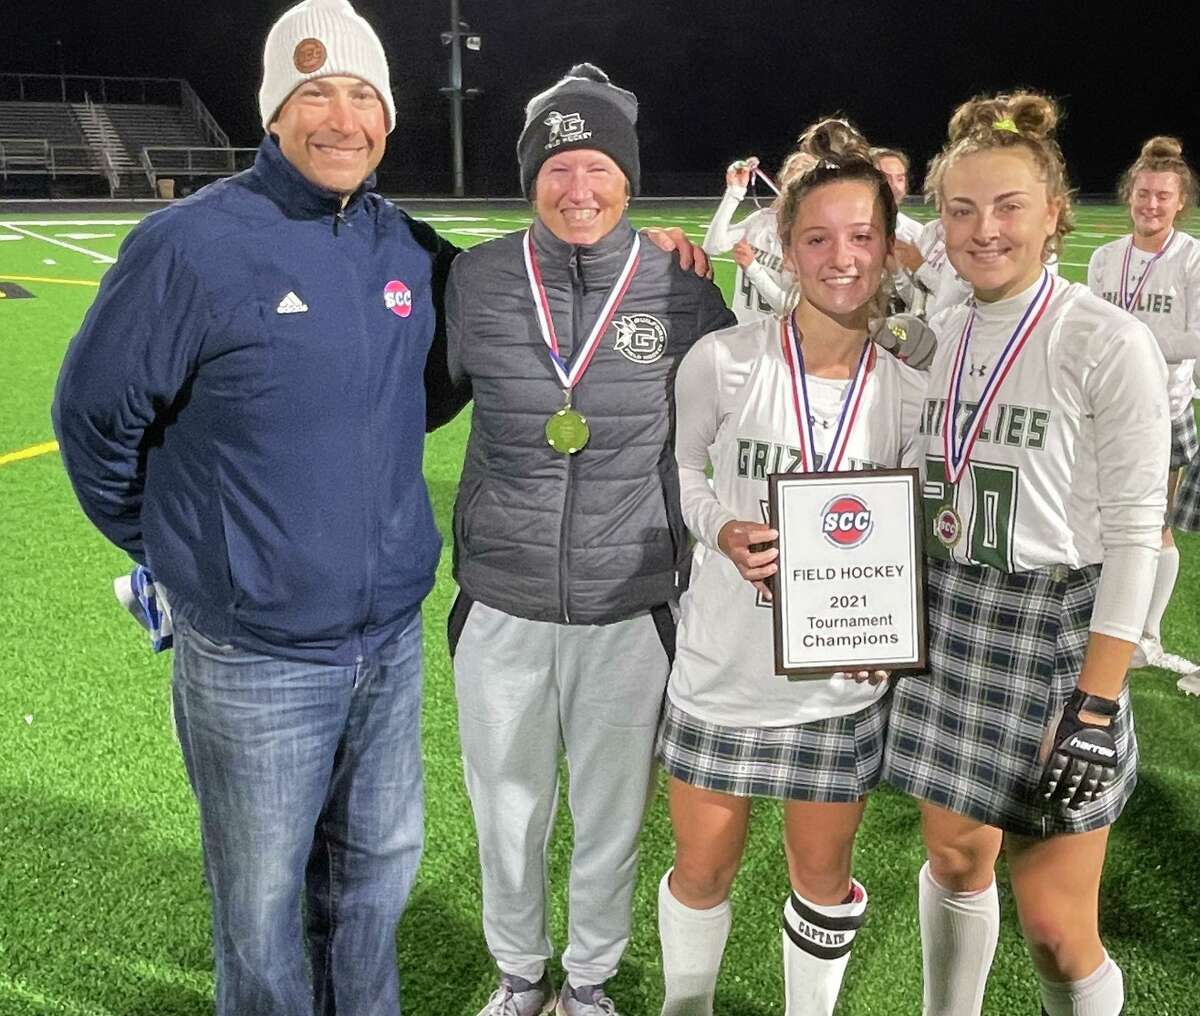 Guilford coach Kitty Palmer and captains along with SCC Commissioner Al Carbone after the Grizzles won the SCC field hockey championship Wednesday.